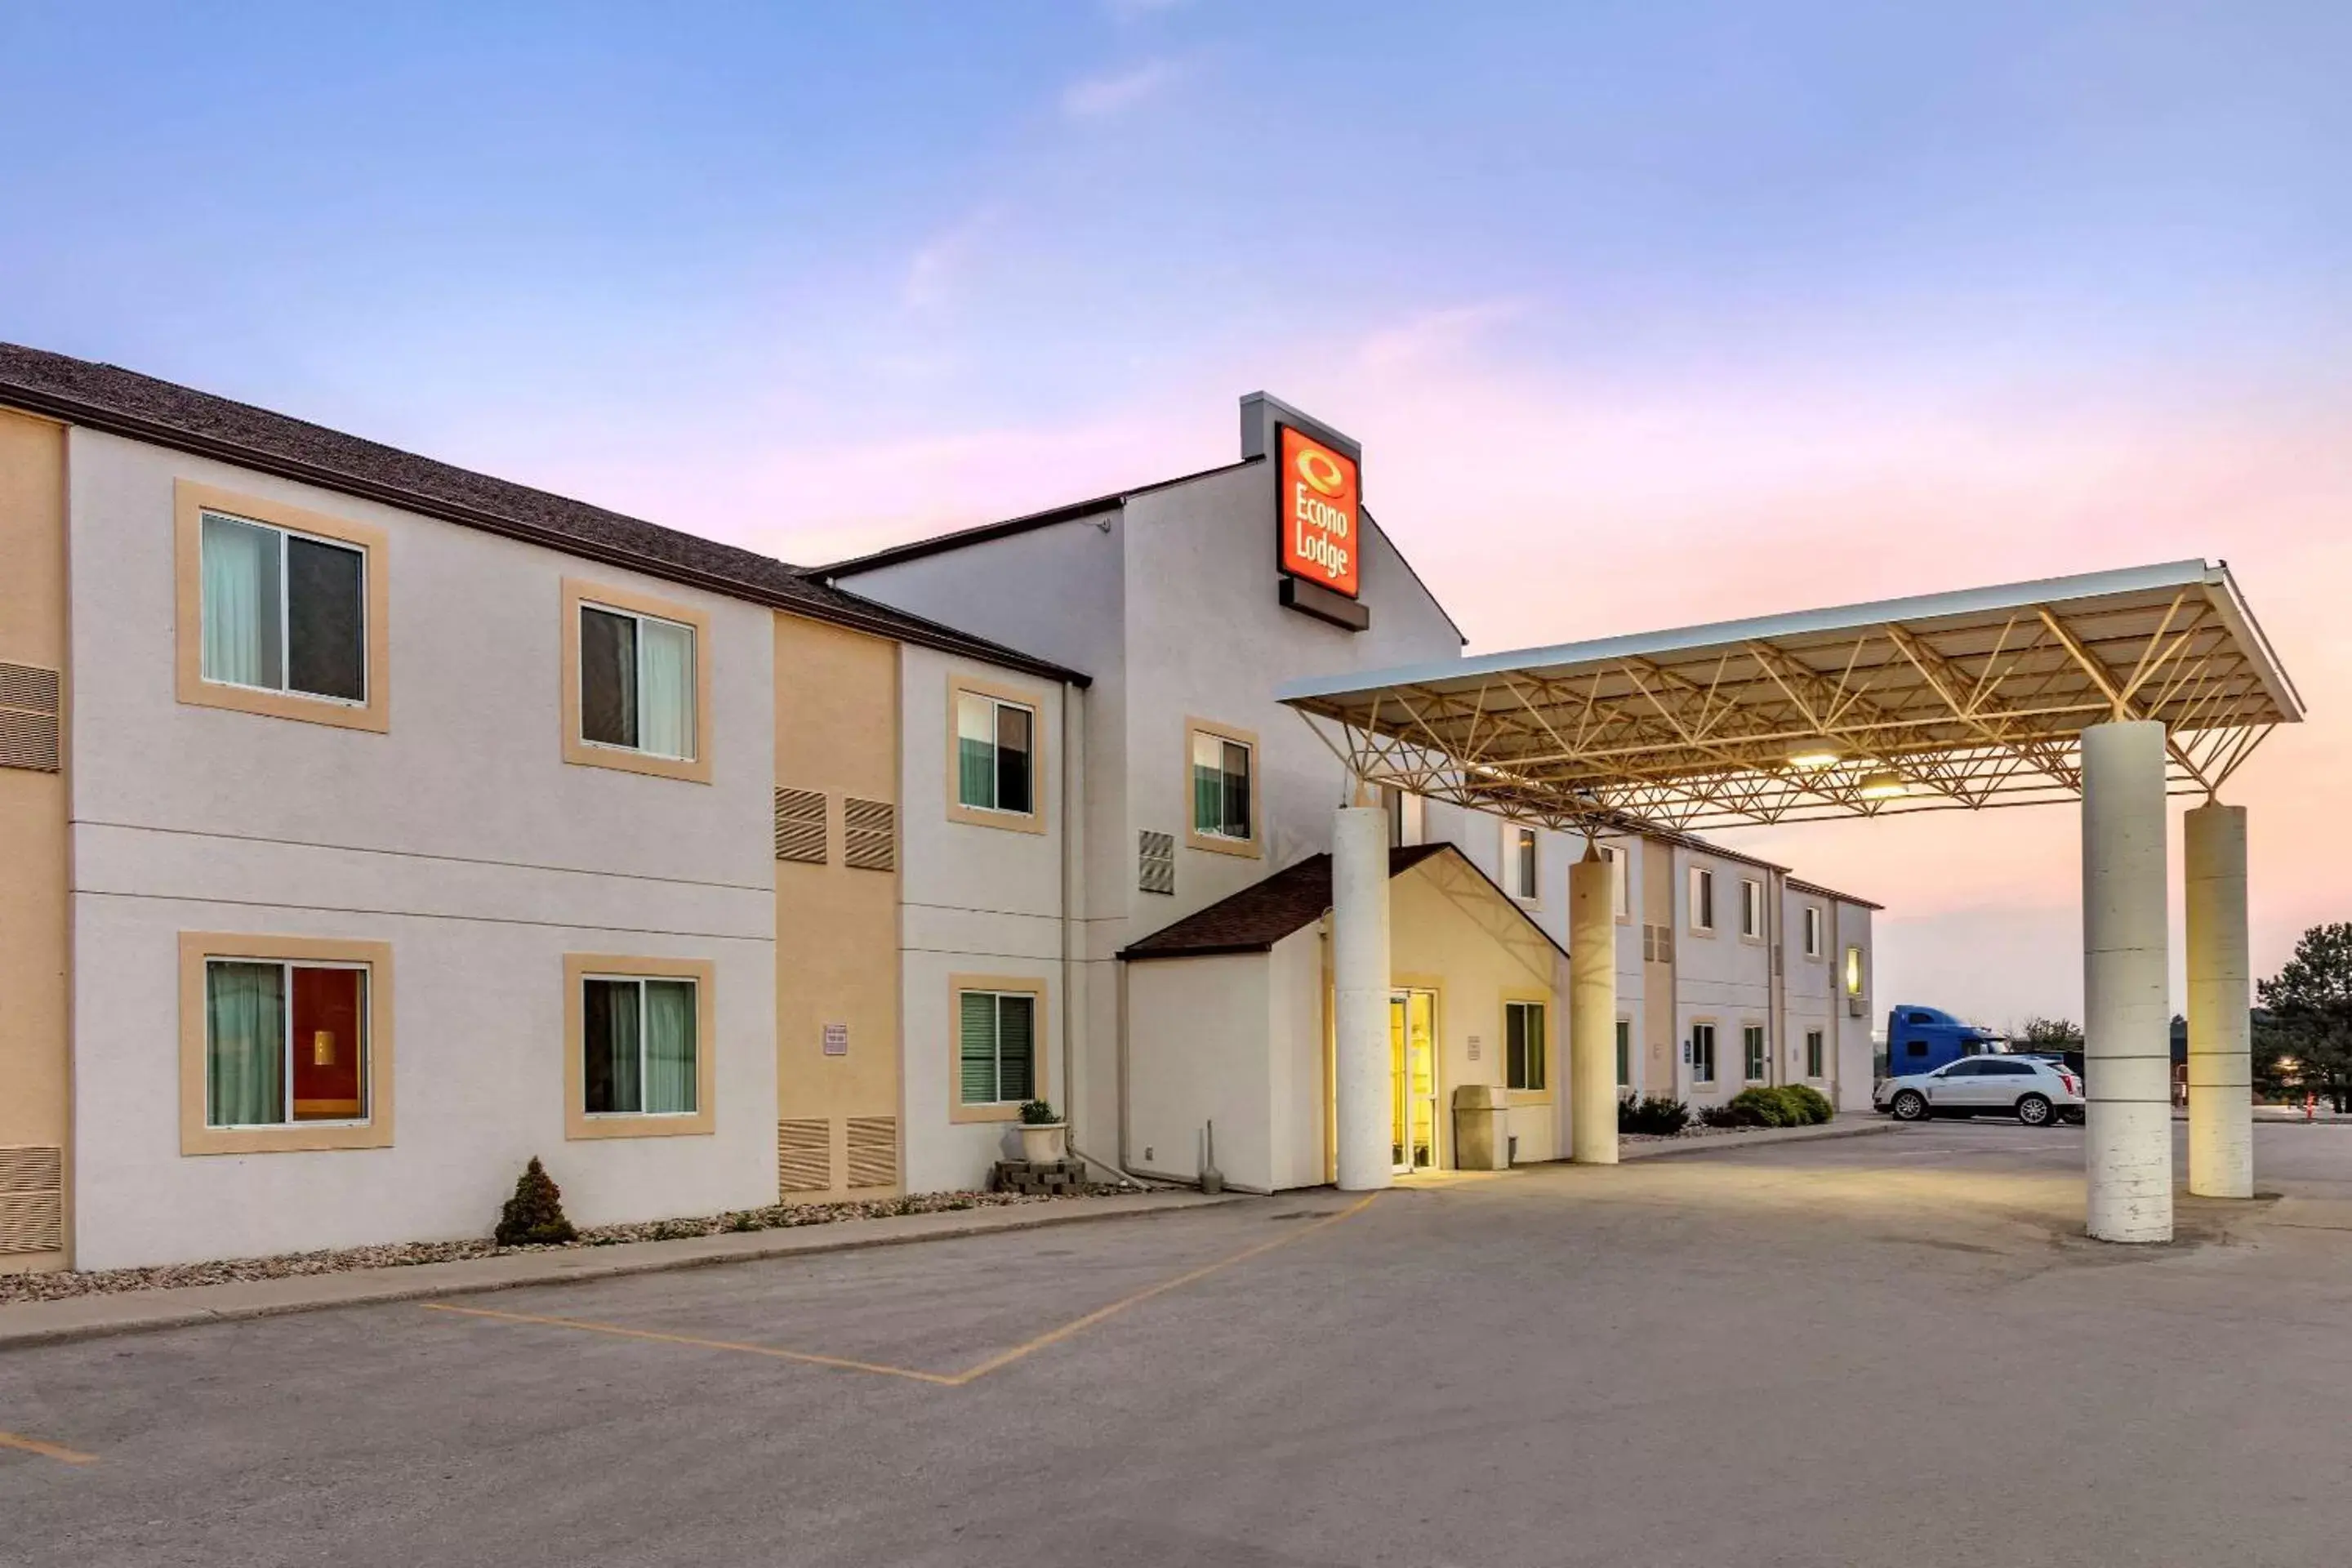 Property Building in Econo Lodge Belle Fourche